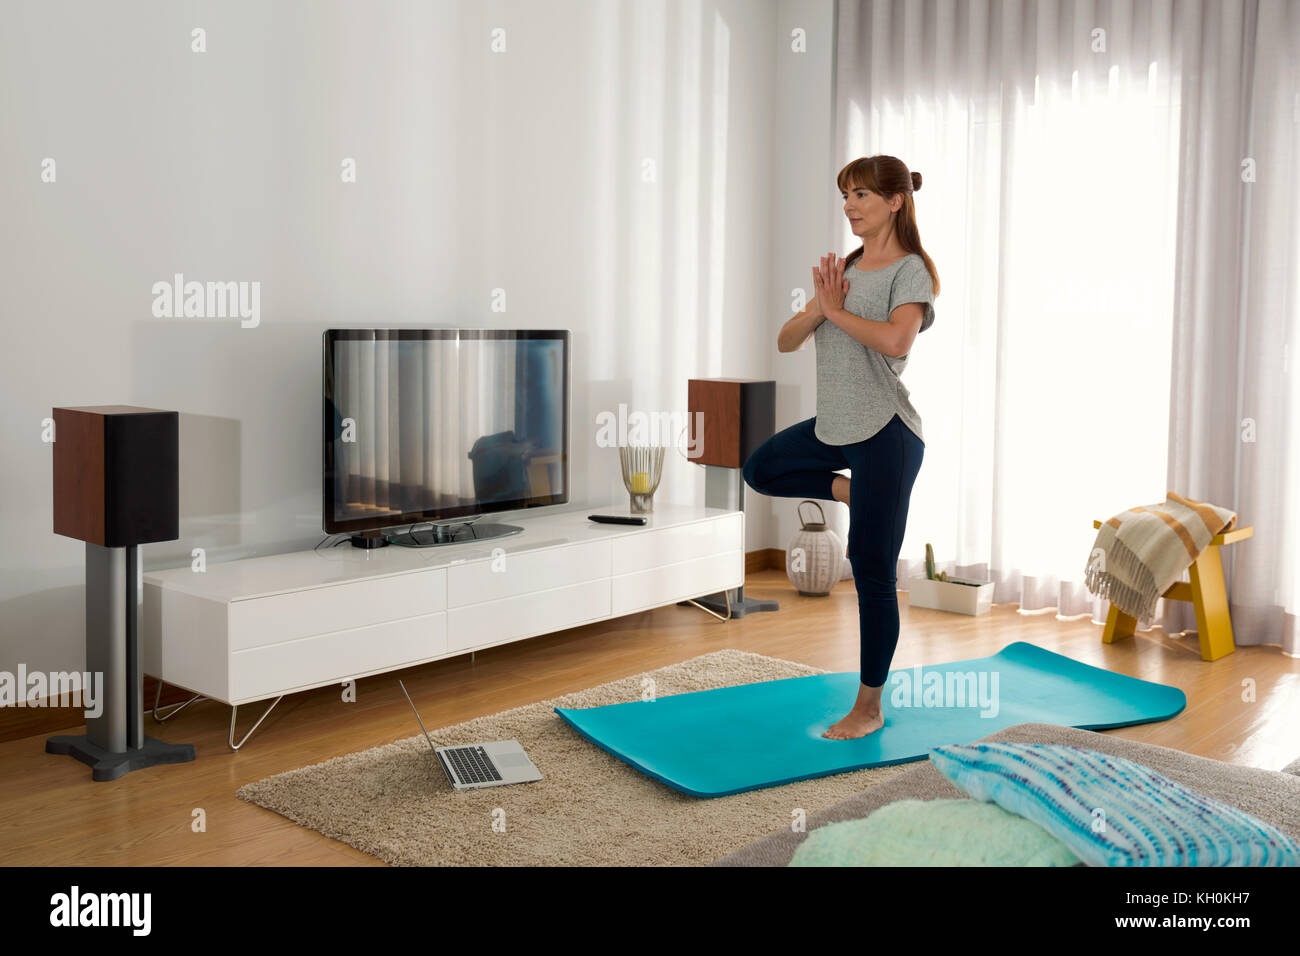 Full length shot of a woman doing yoga at home Stock Photo